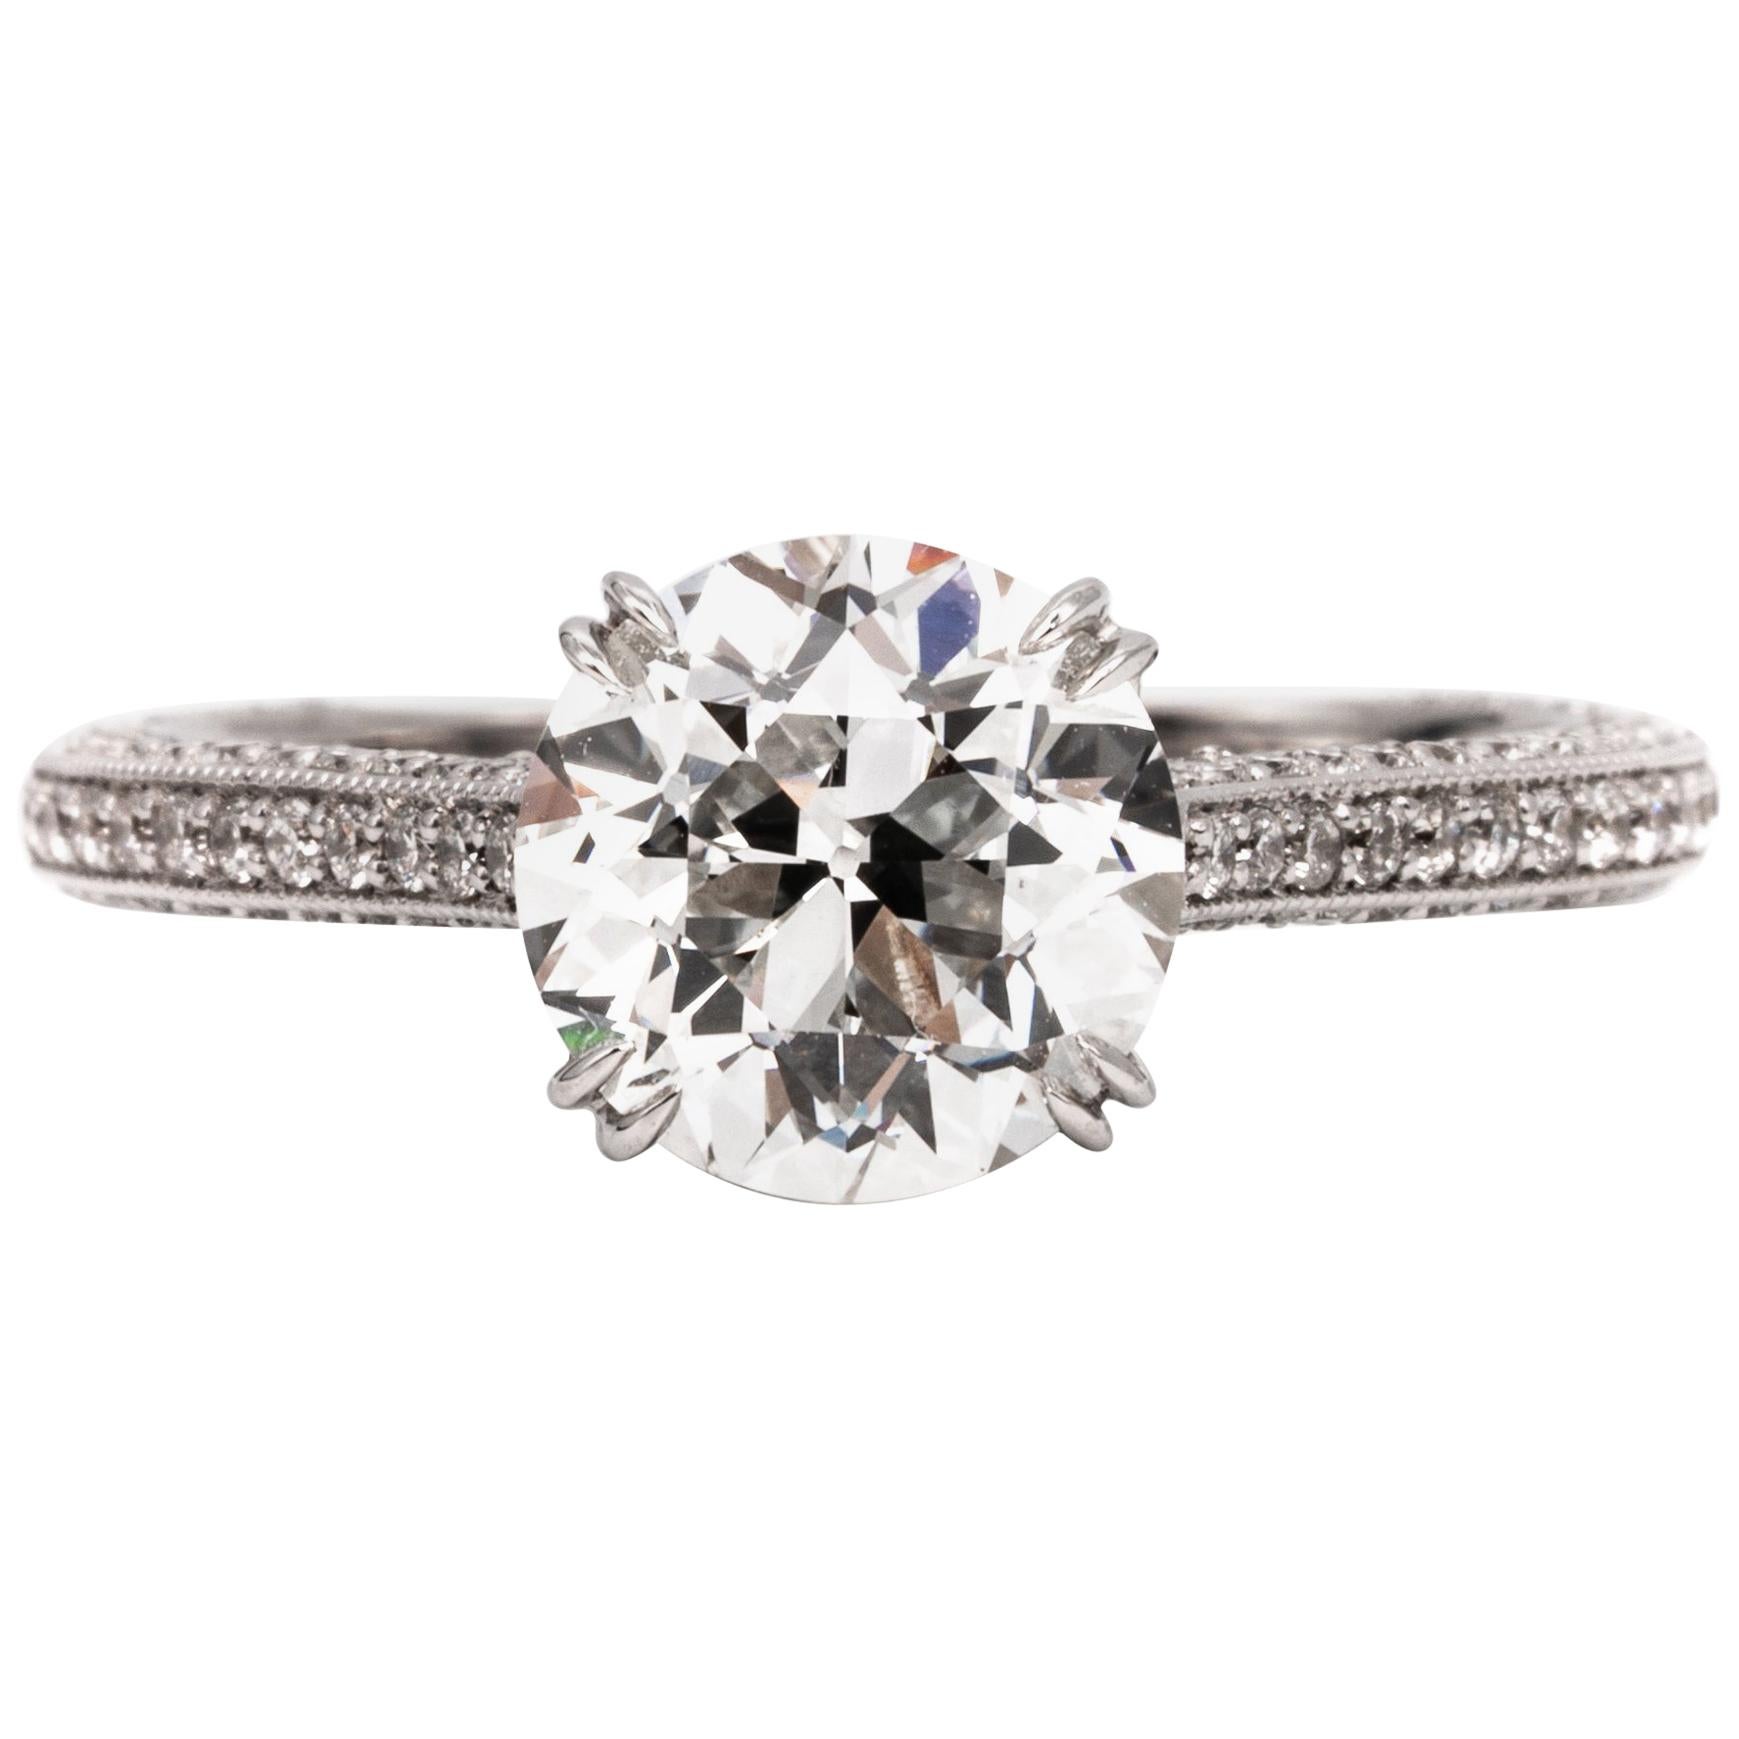 2.42 Carat Old Euro Cut Diamond Engagement Ring, in 18k, by The Diamond Oak